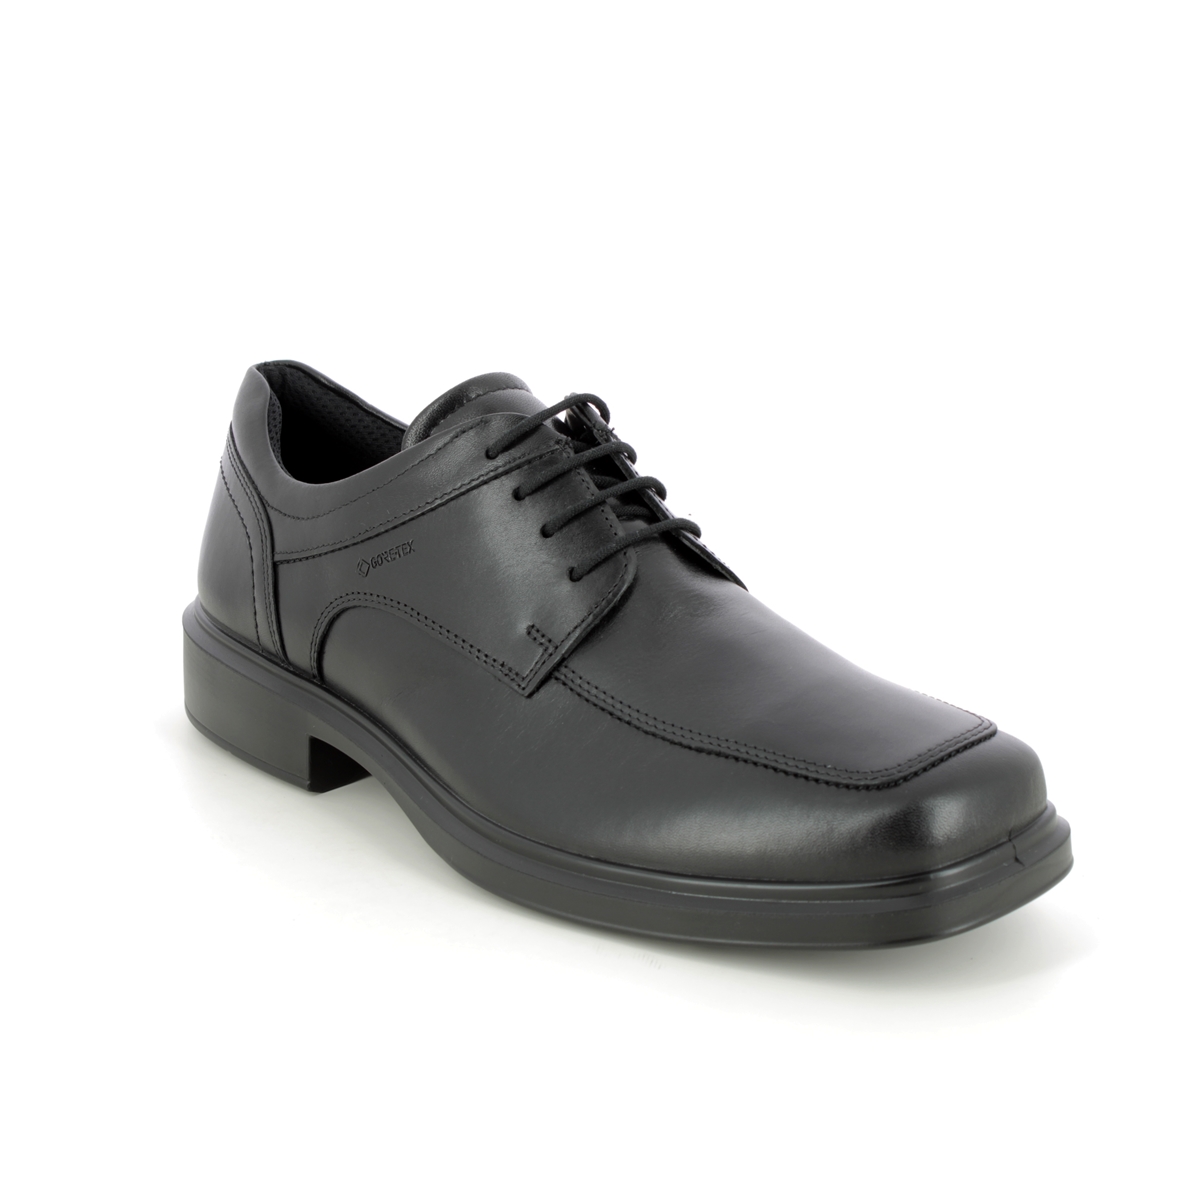 ECCO Helsinki 2 Gtx Black leather Mens formal shoes 500204-01001 in a Plain Leather in Size 43